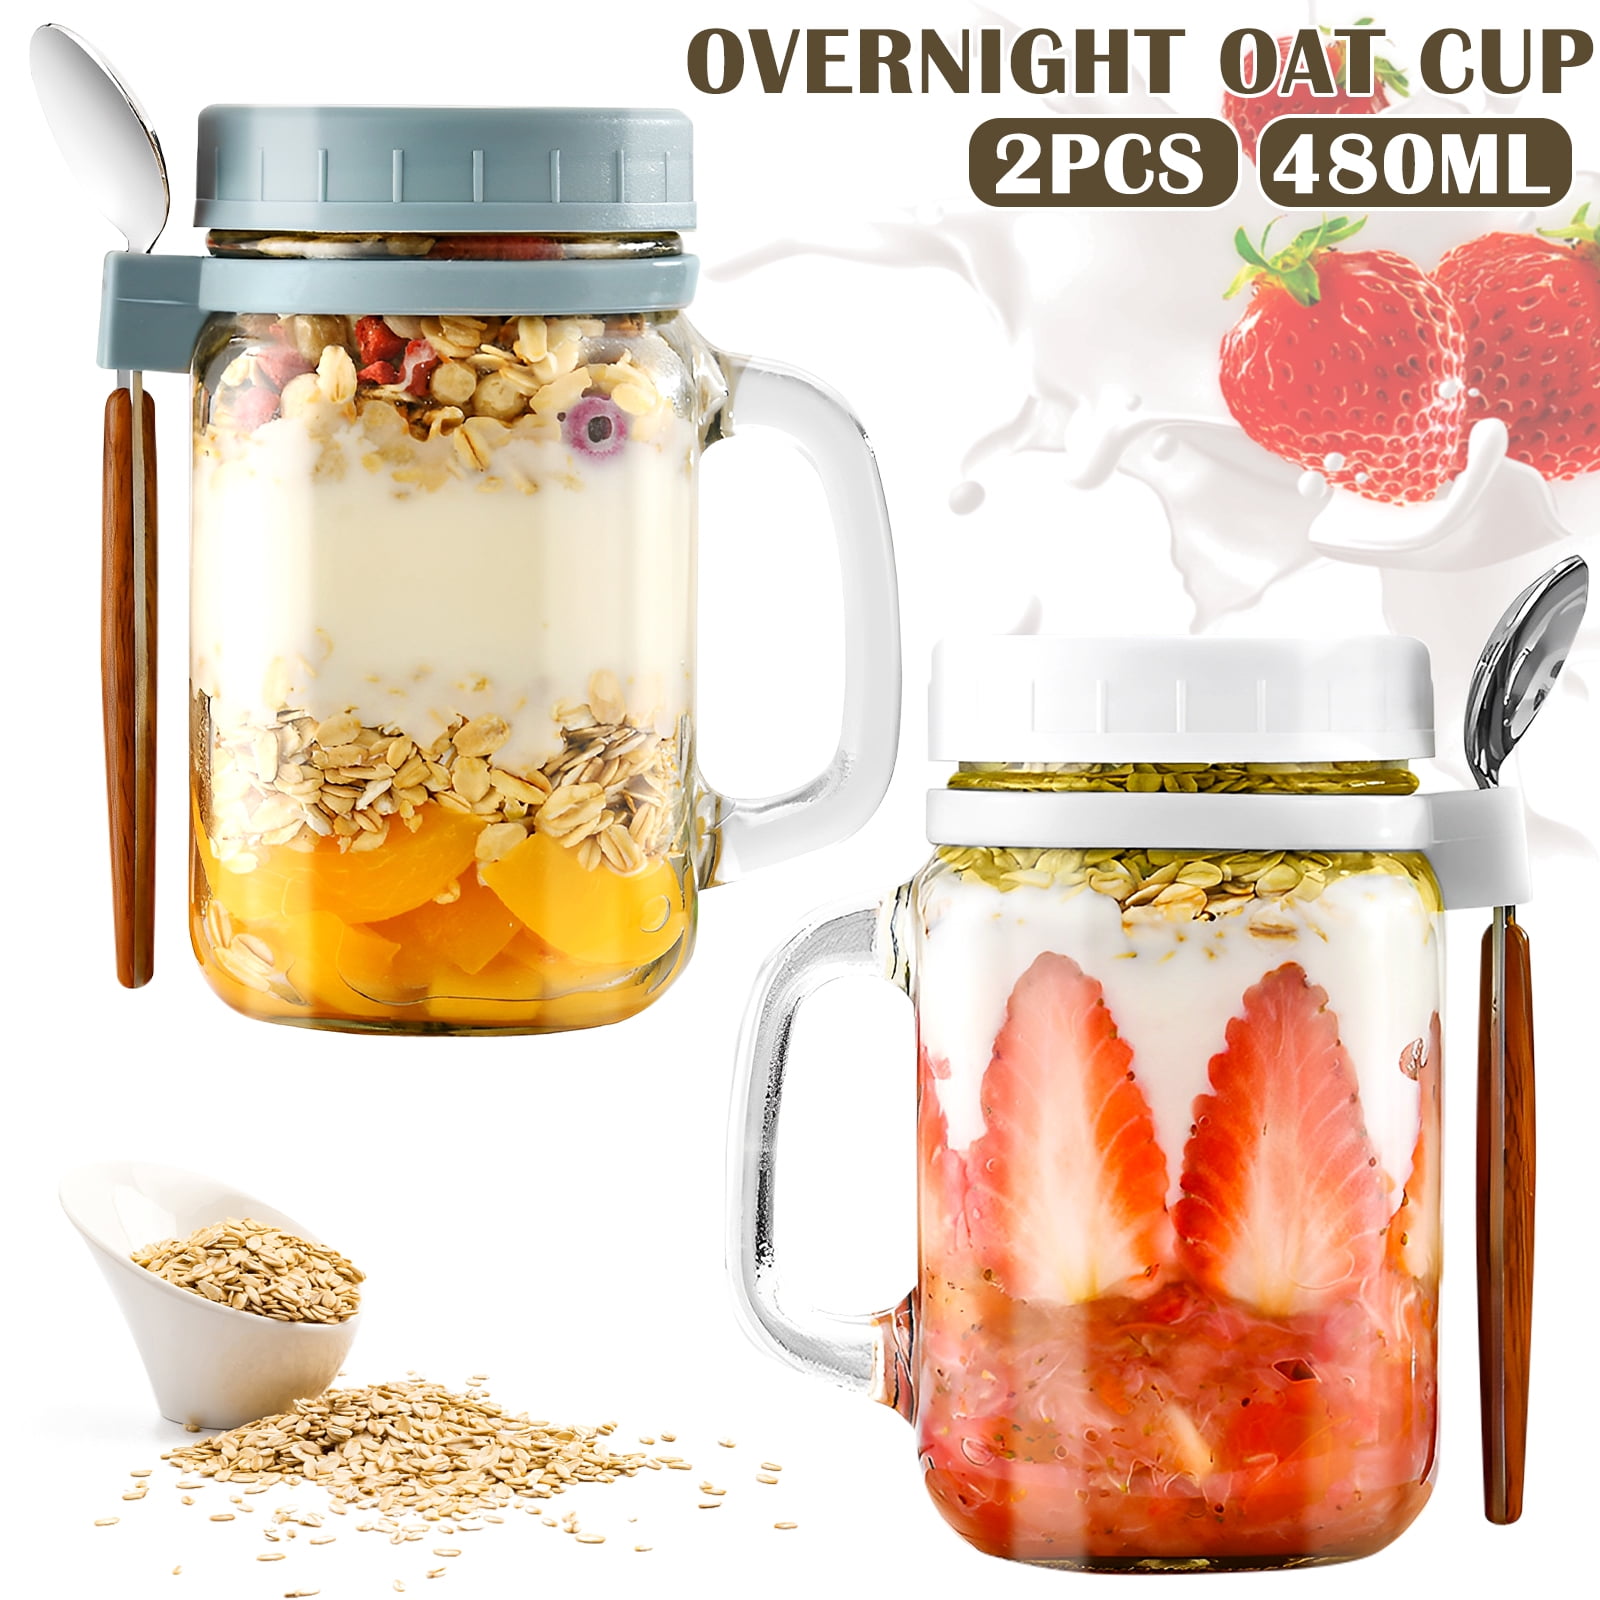  Neegaurd 2 Pack Overnight Oats Containers with Lid and Spoon,  16 Oz Large Glass Overnight Oats Jars with Portable Handle, Reusable  Airtight Glass Oatmeal Cups for Cereal Yogurt and Parfait: Home